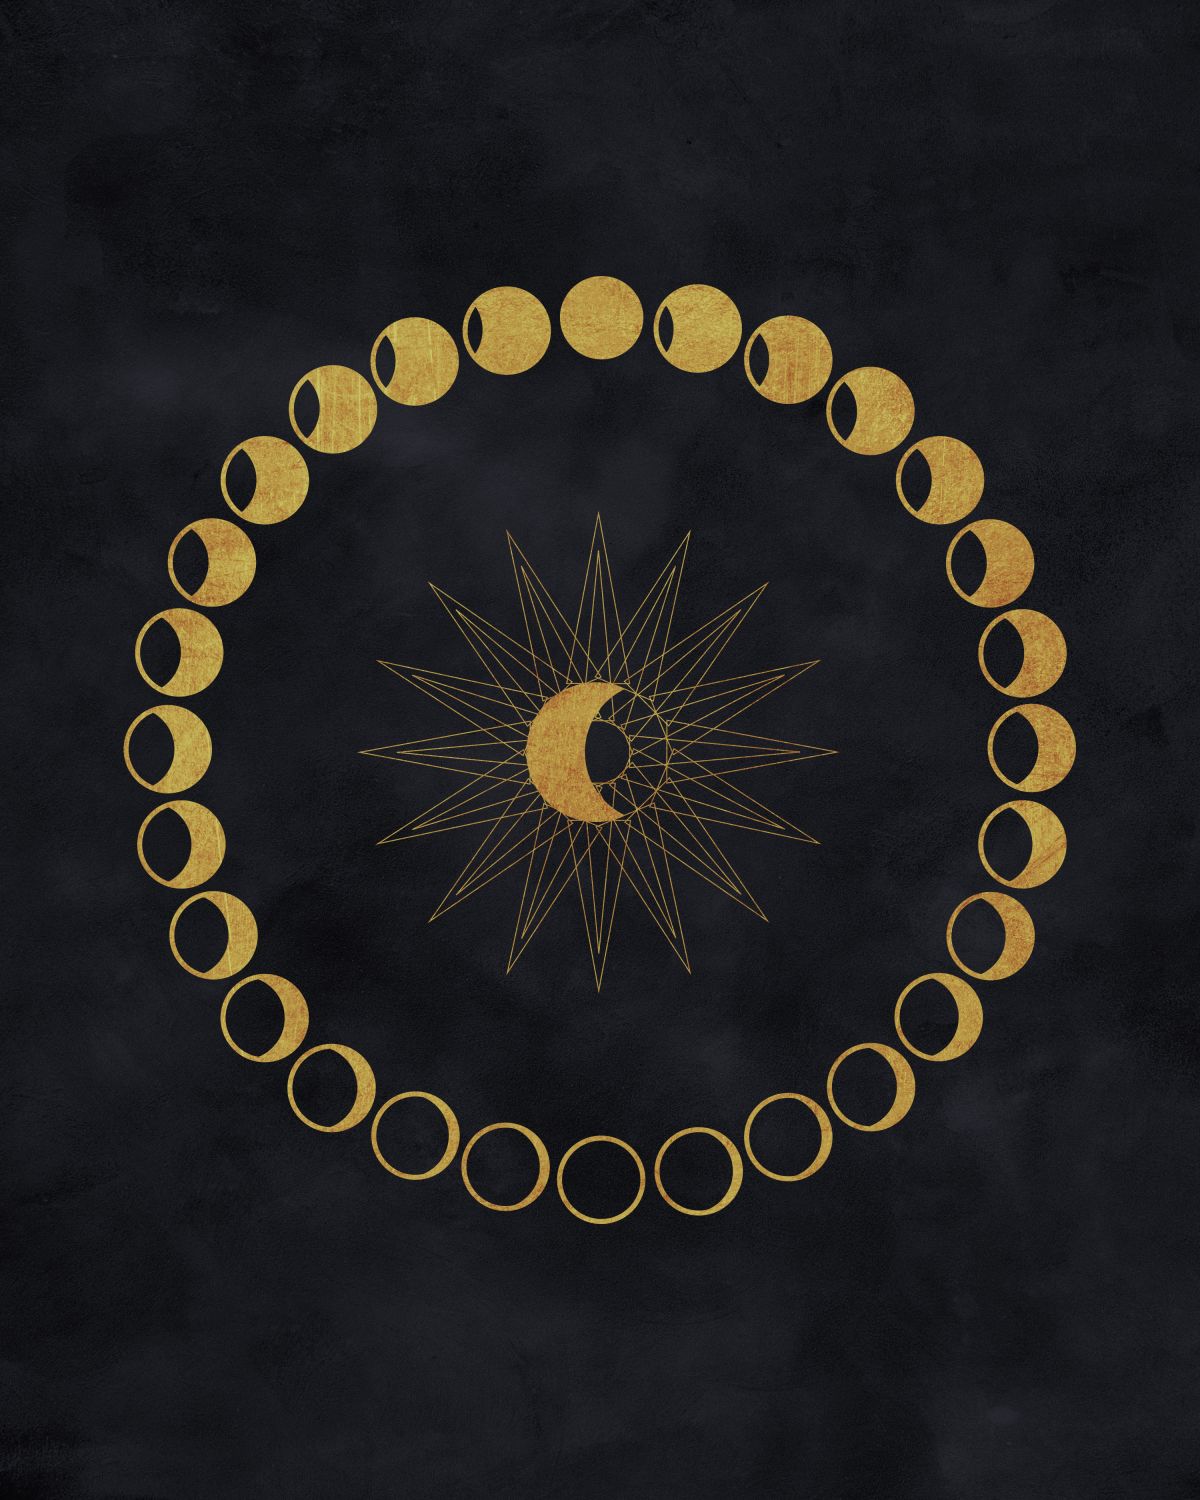 Numerous Moon Phases